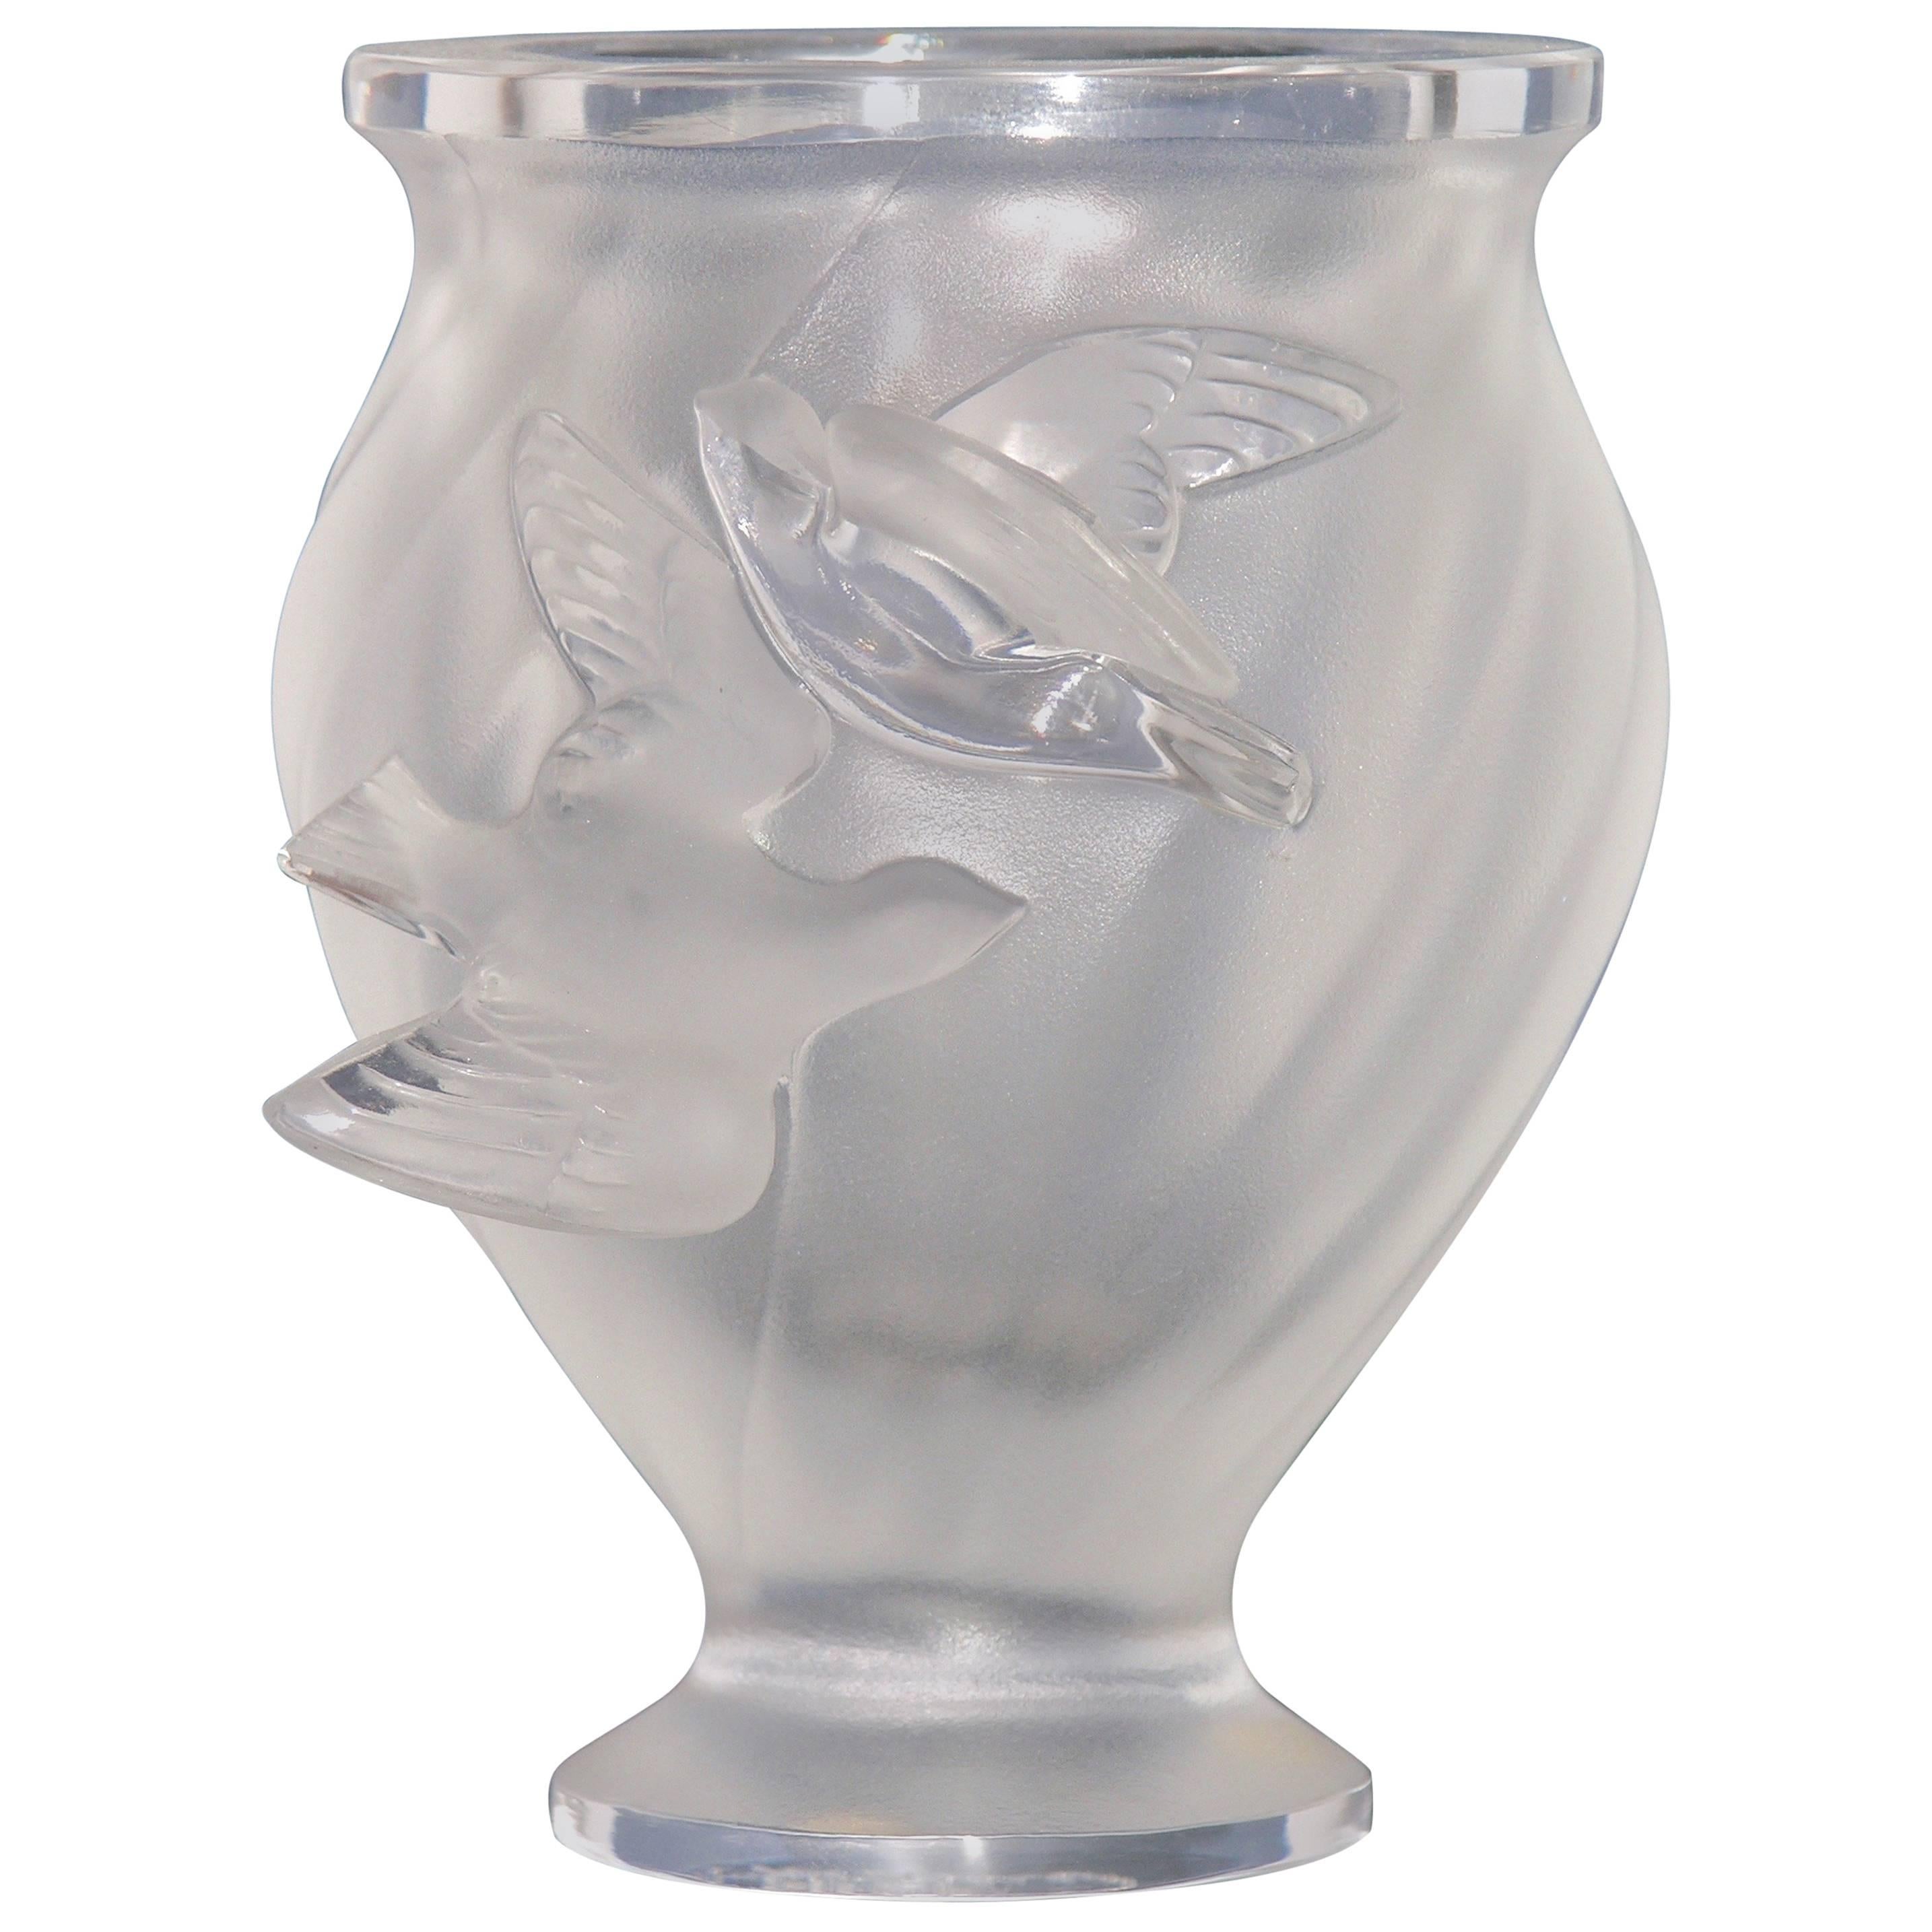 1950s Lalique Small French Crystal Glass Rosine Vase with Birds in Flight